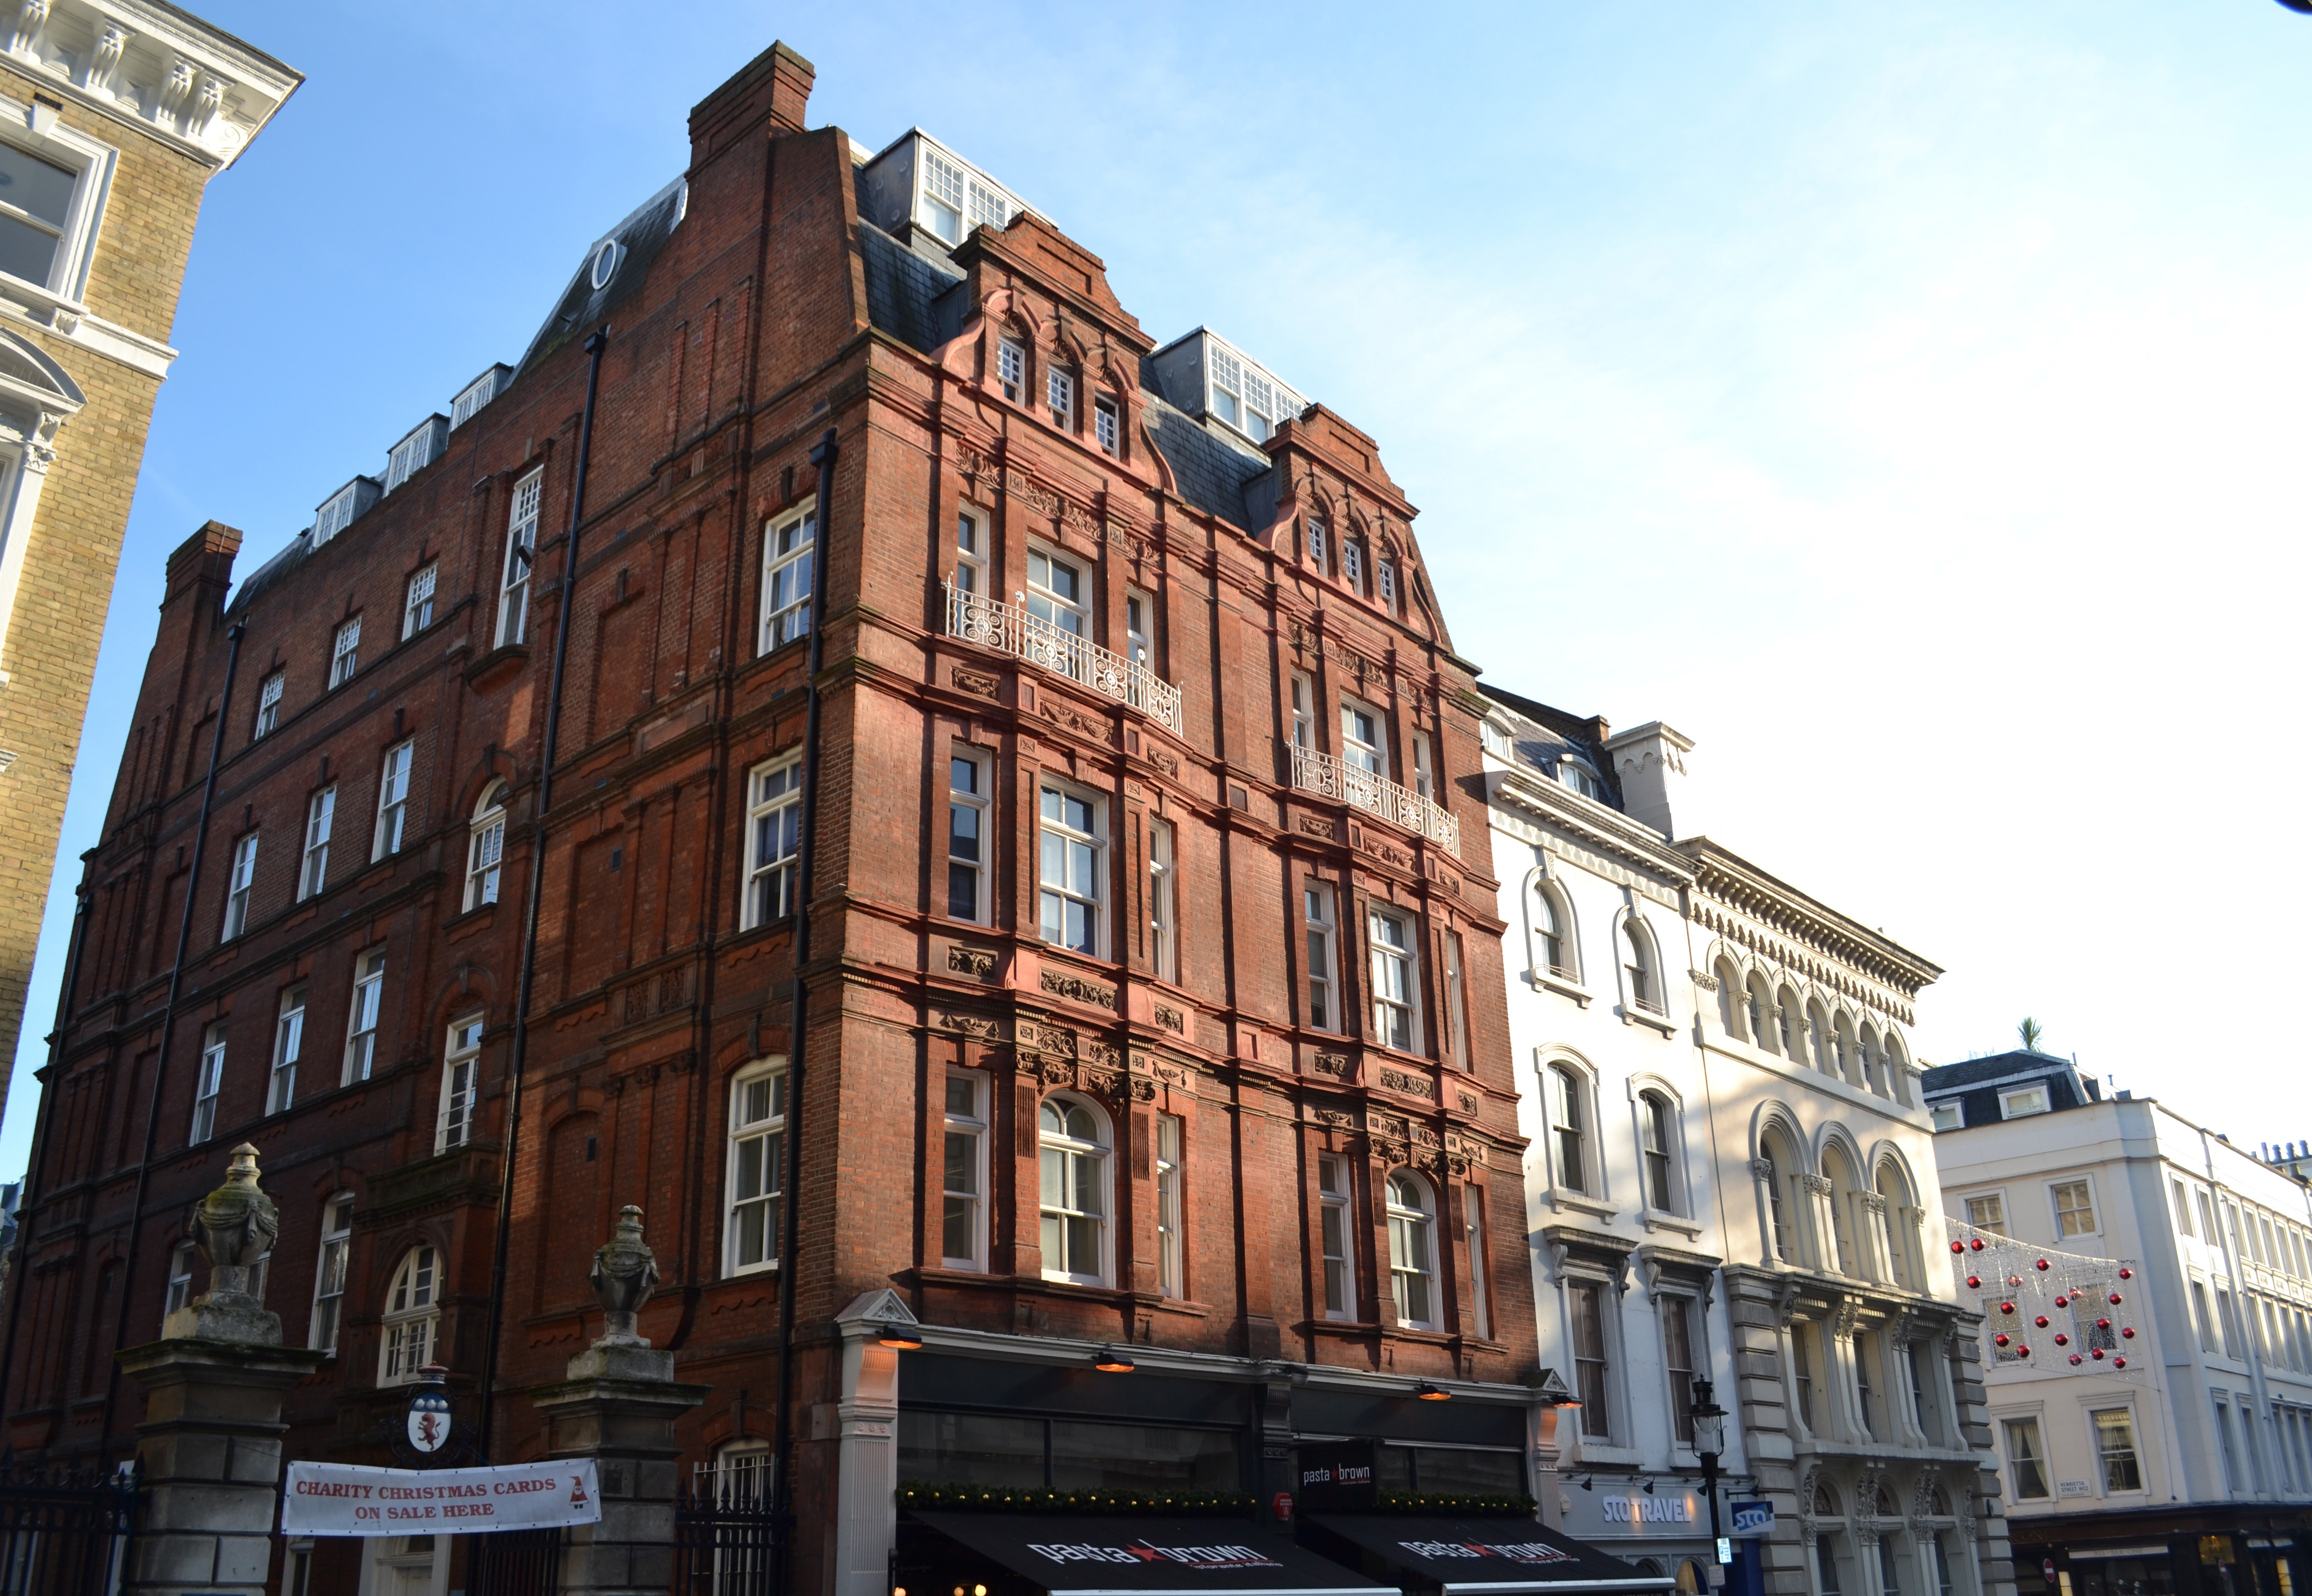 Planning Permission granted for 31-32 Bedford Street, Covent Garden